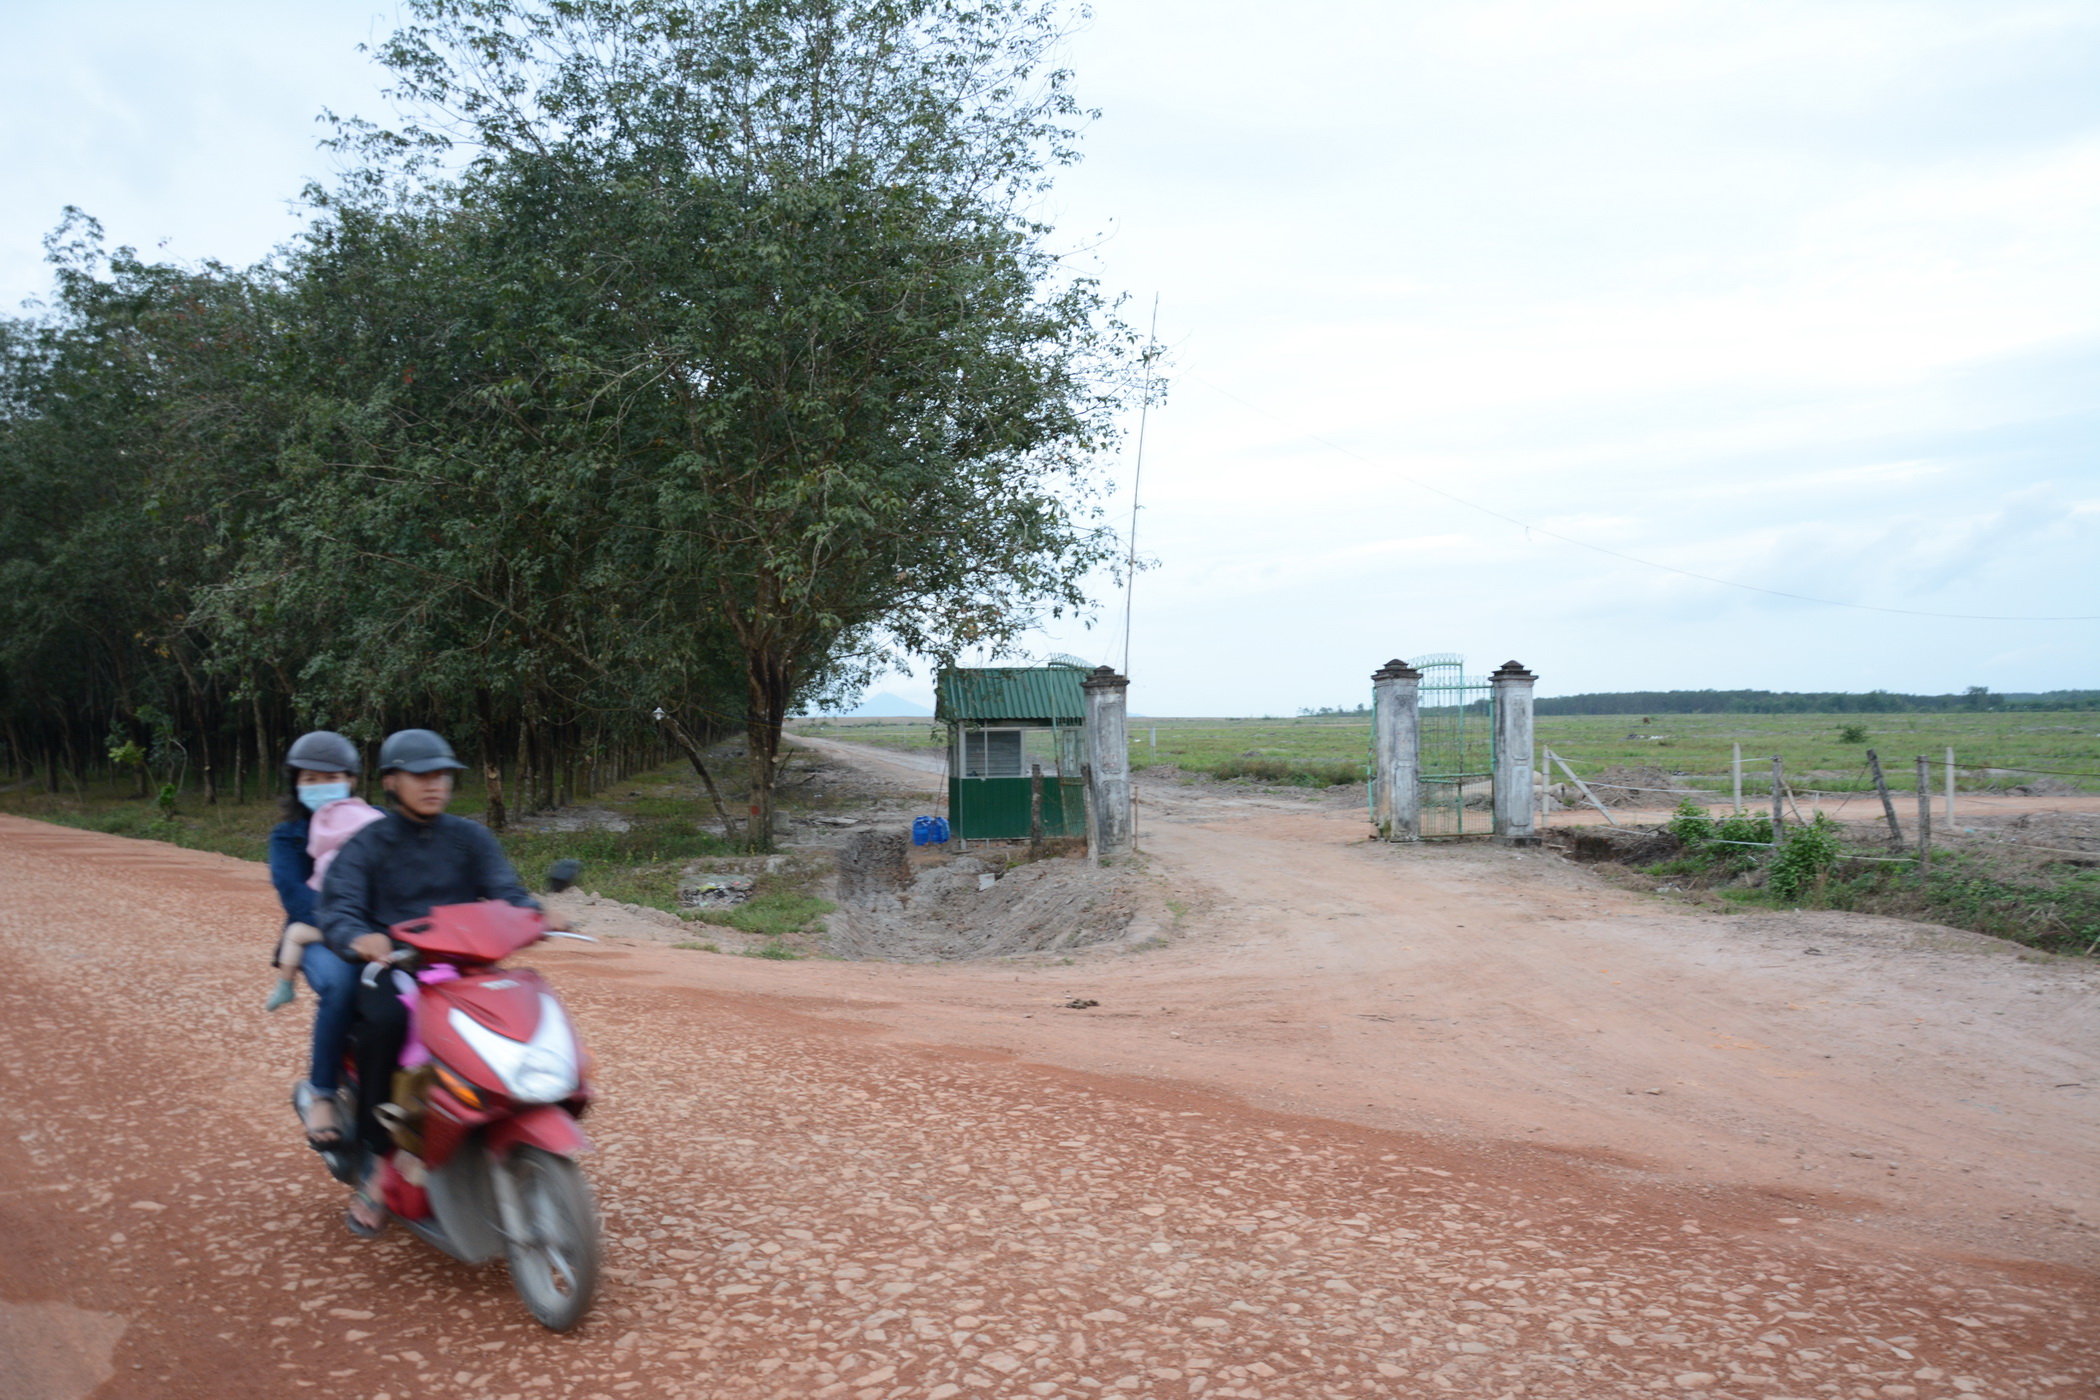 Company caught leasing land in unlicensed project in southern Vietnam